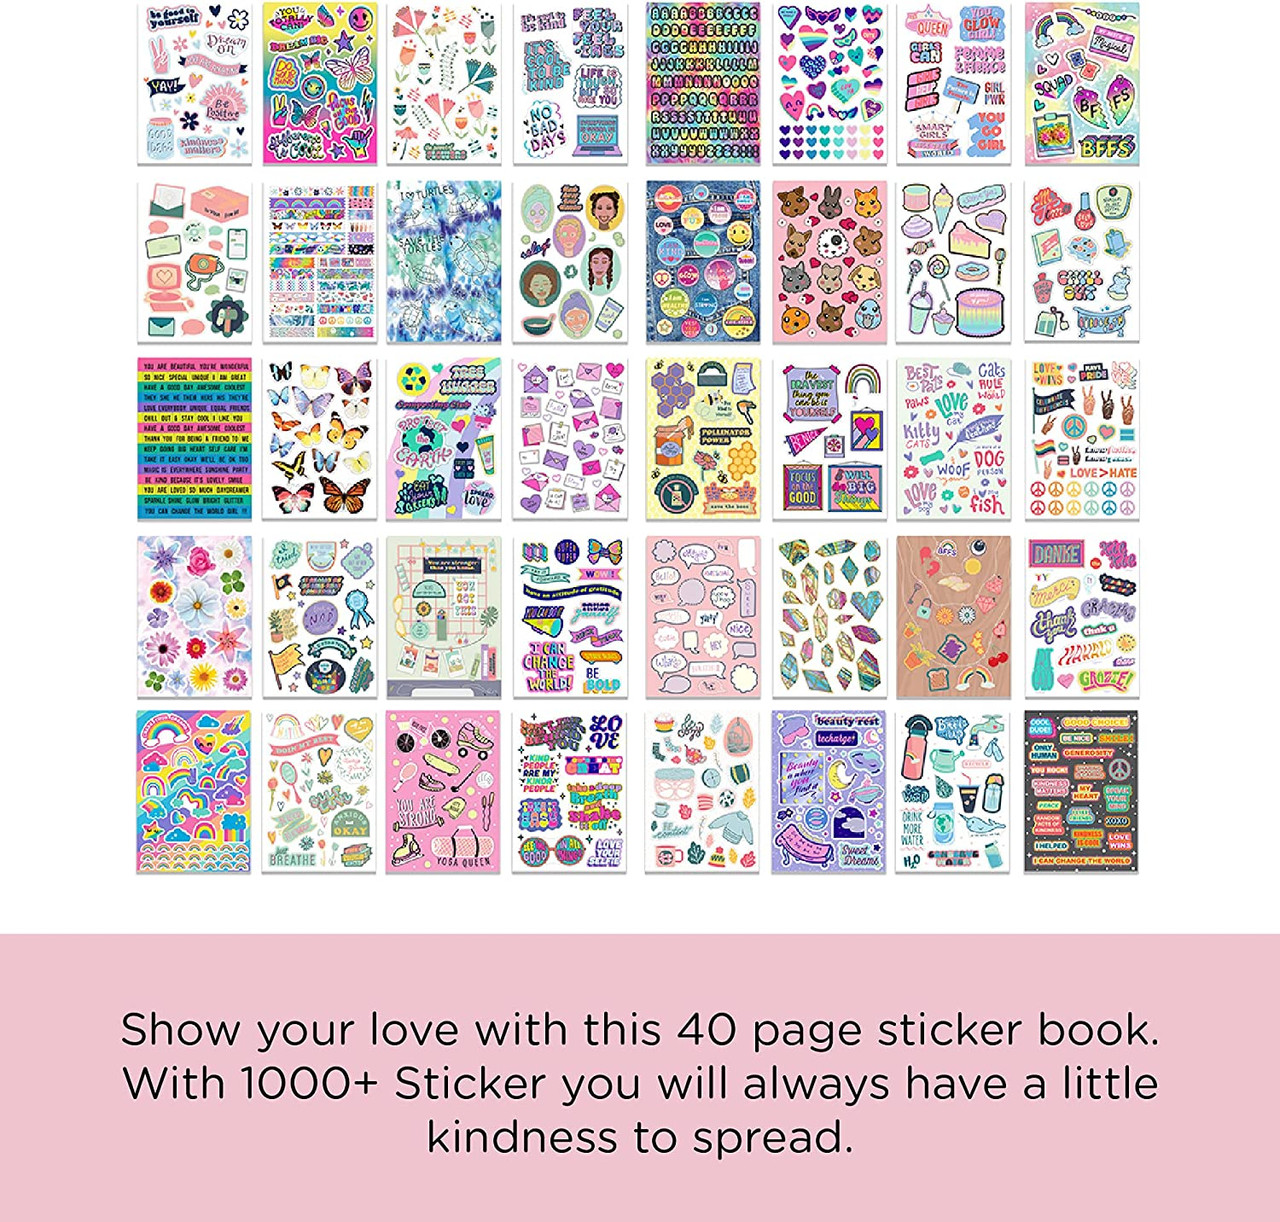 Fashion Angels 1000+ Animal Sticker Book - 40-Page Sticker Book For Kids -  Over 1000 Stickers for Scrapbooking, Planner Decor, Gifts & Creative Play